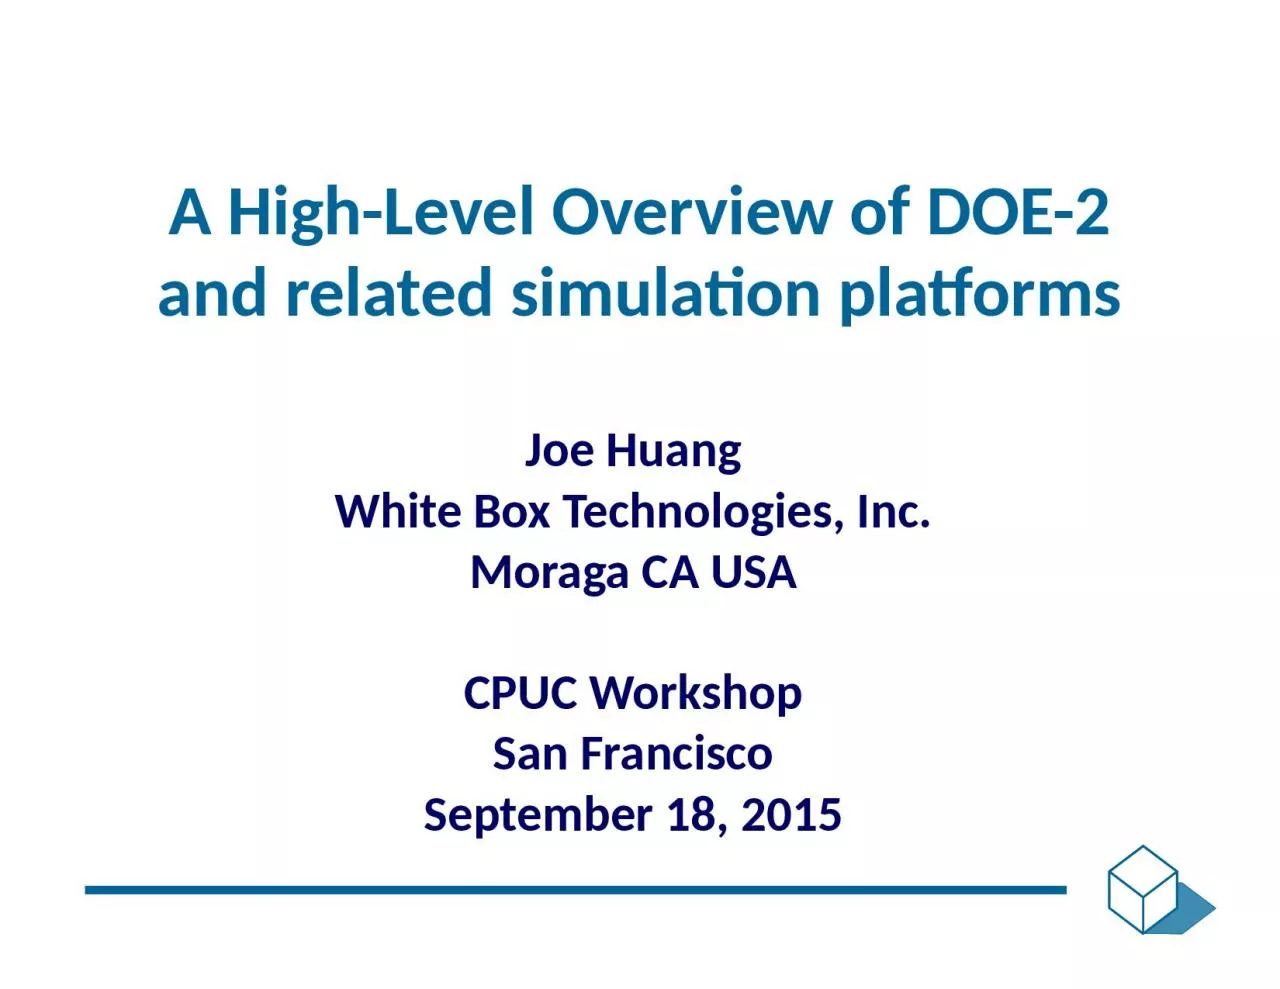 A High-Level Overview of DOE-2 and related simulation platforms